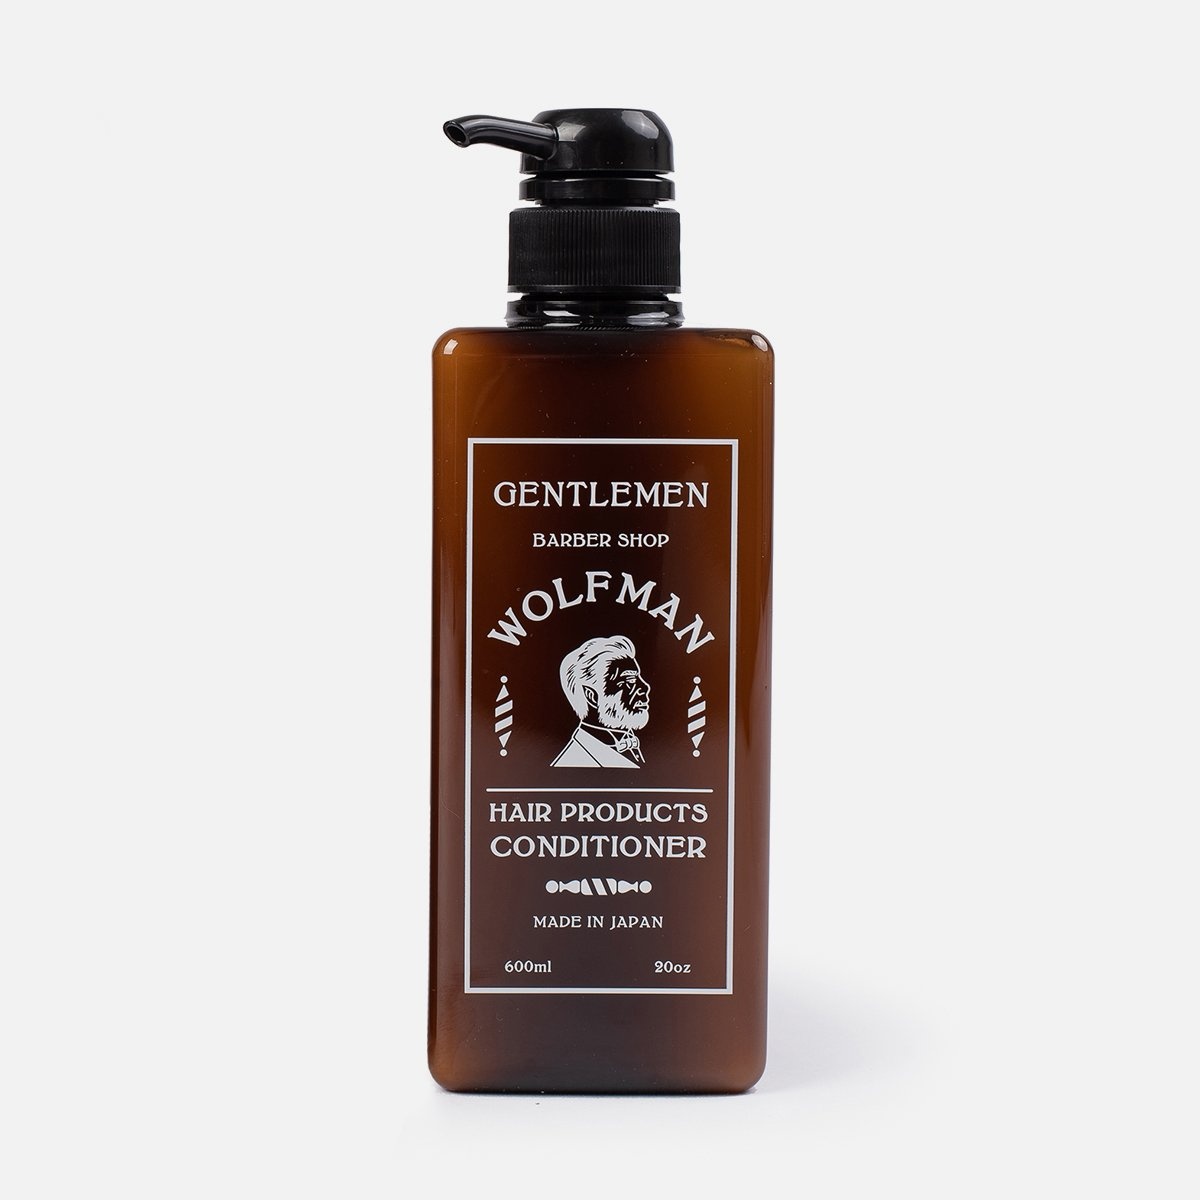 WOLF-COND Wolfman Barber Shop - Conditioner - 1